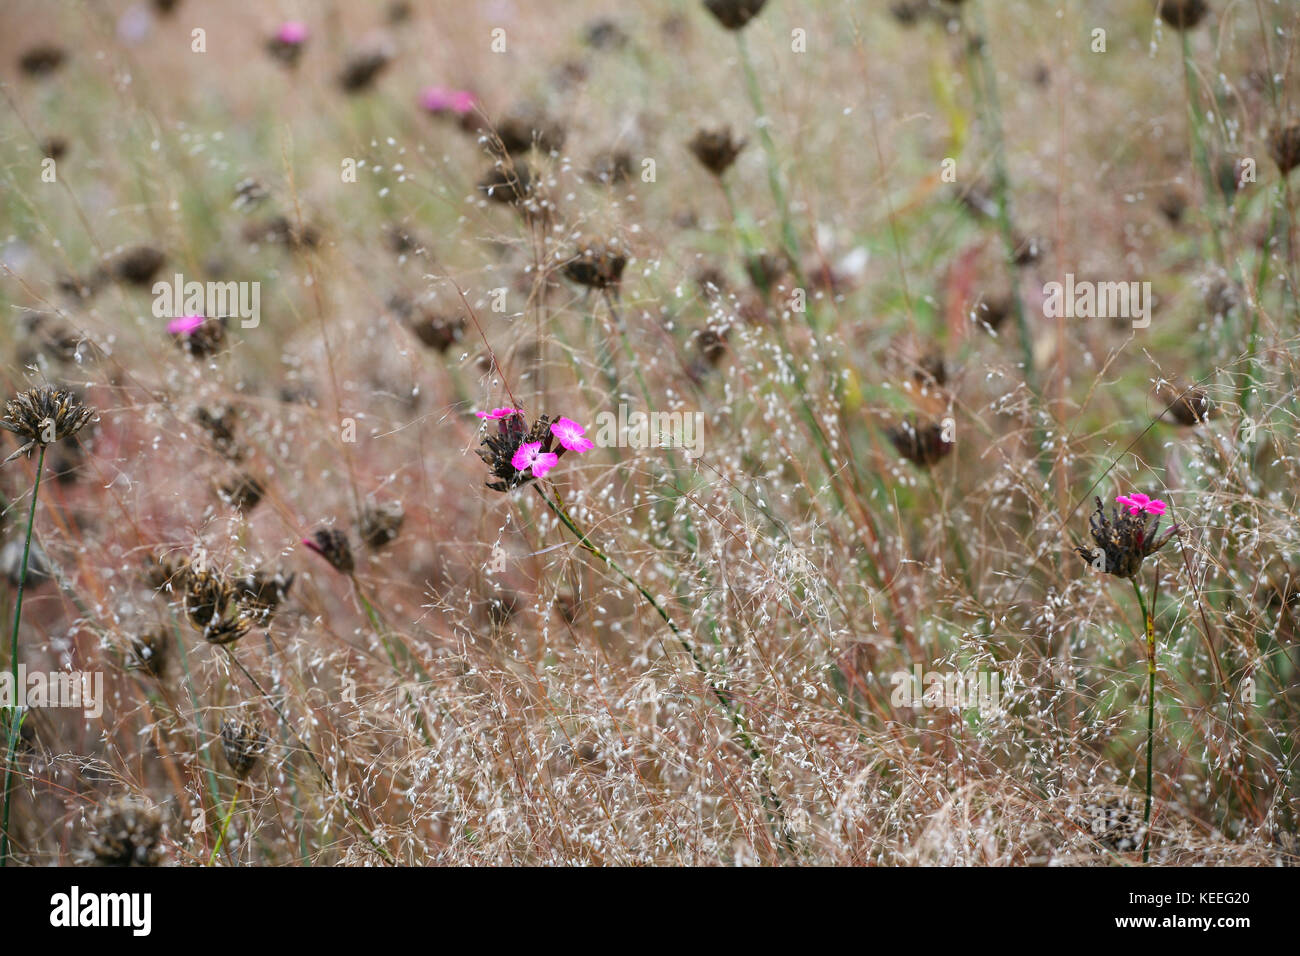 Dianthus carthusianorum flowering in amongst grasses, late summer / autumn Stock Photo